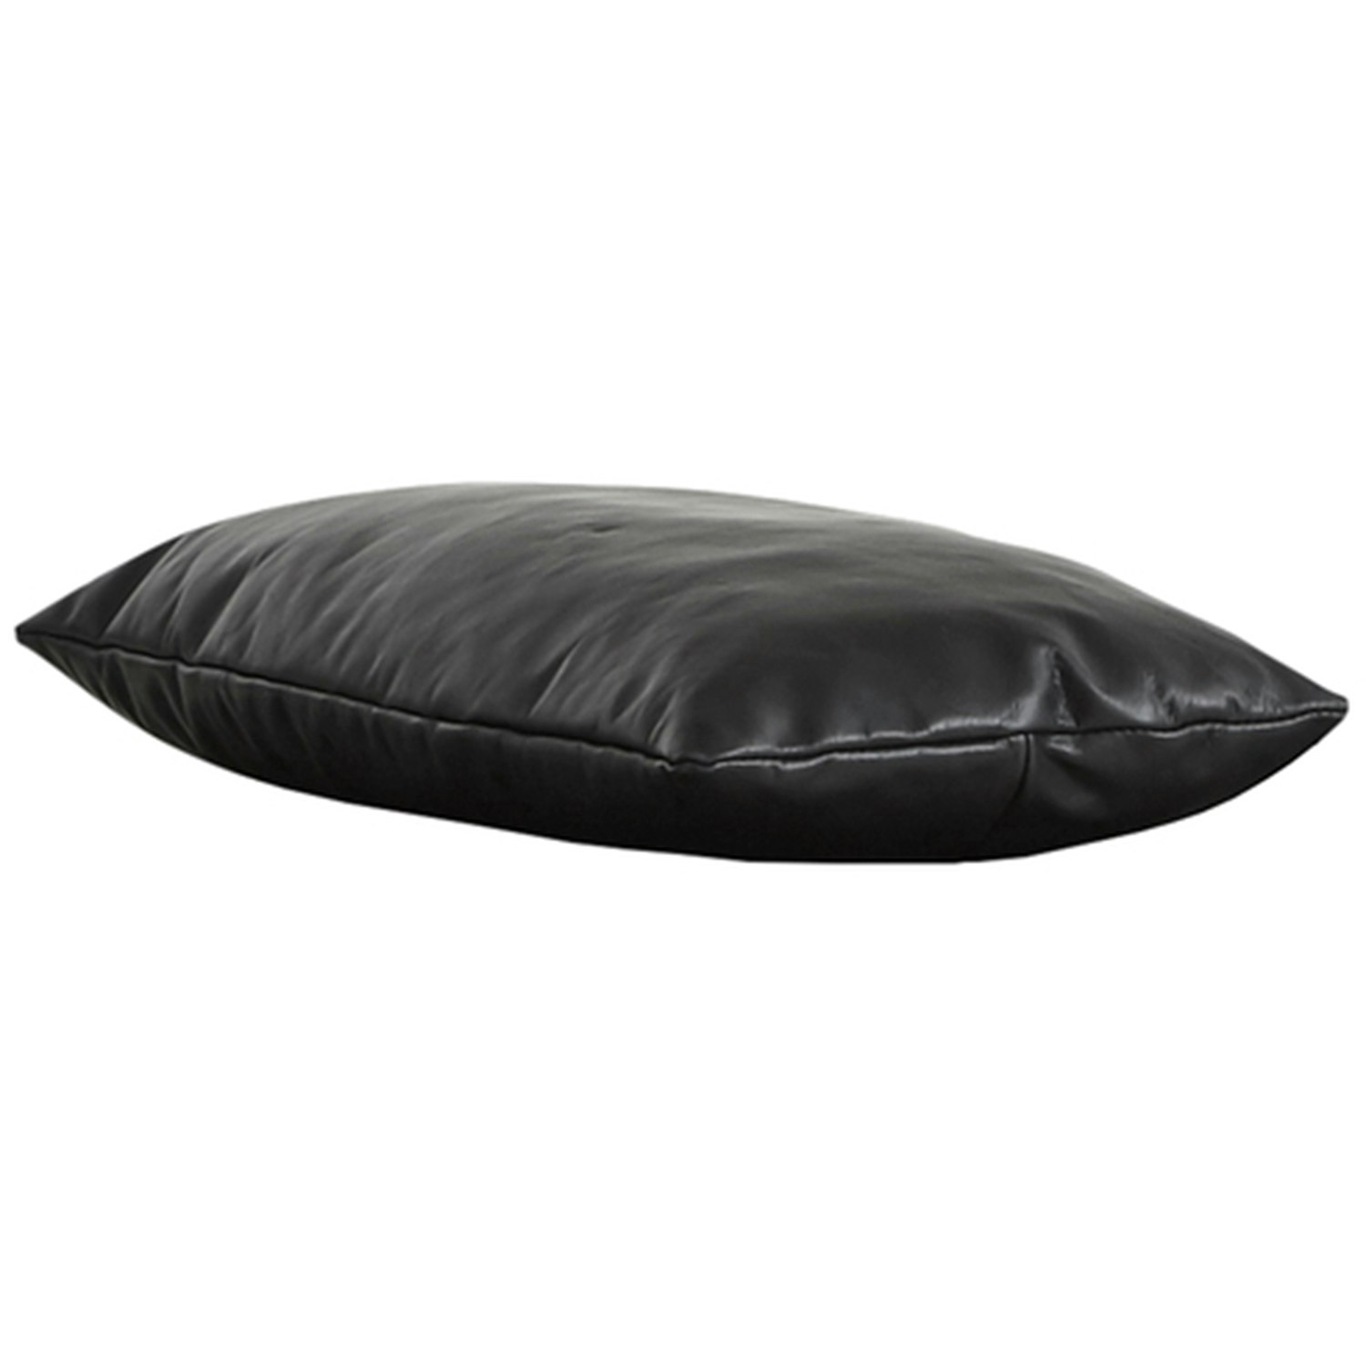 Level Pillow For Daybed, Black Leather